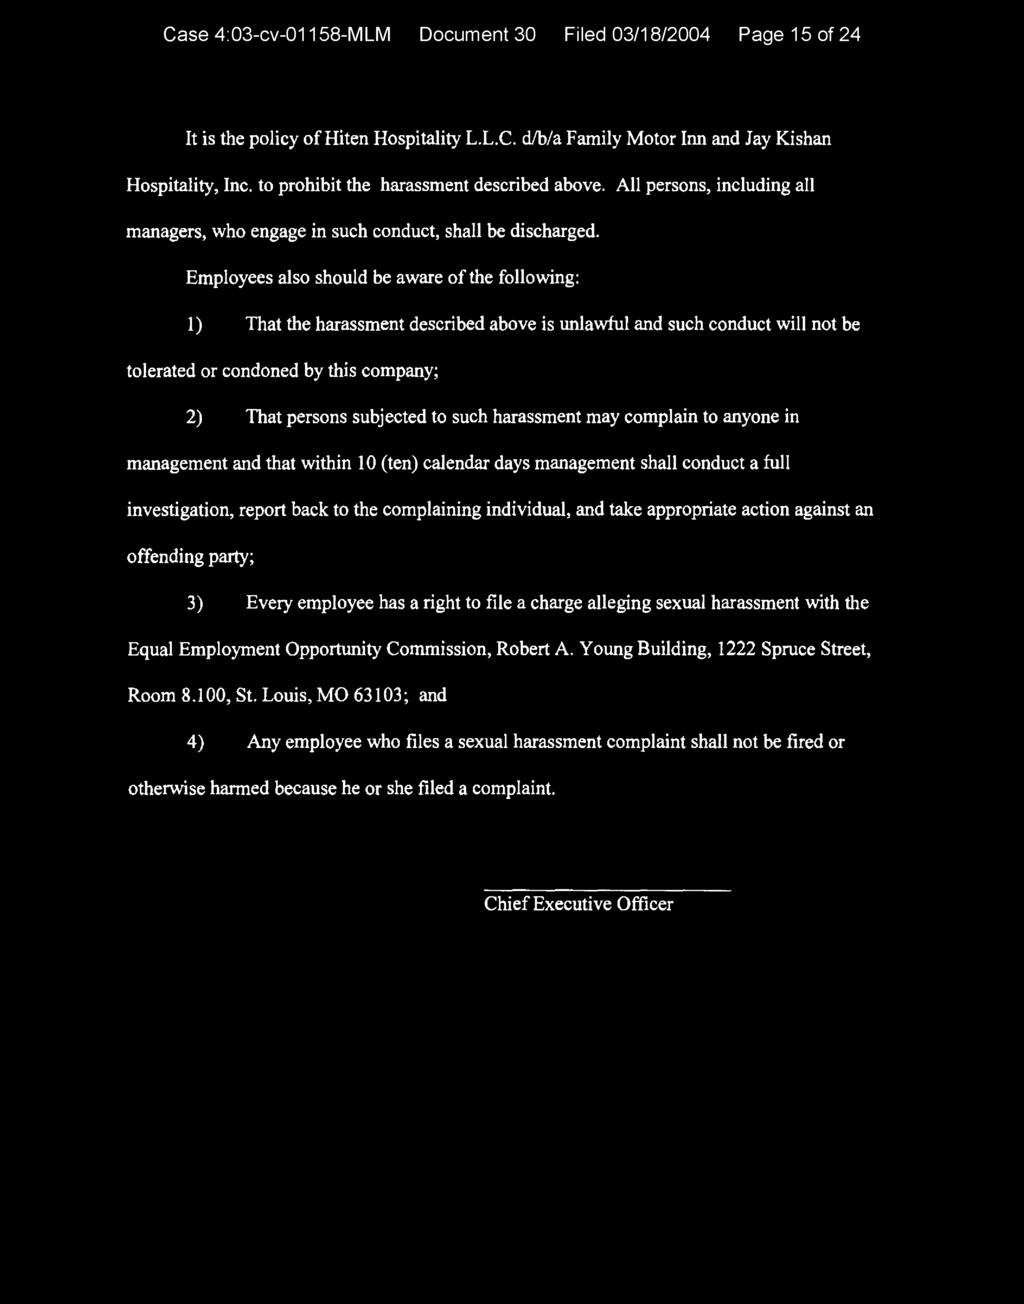 Case 4:03-cv-01158-MLM Document 30 Filed 03/18/2004 Page 15 of 24 It is the policy of Hiten Hospitality L.L.C. d/b/a Family Motor Inn and Jay Kishan Hospitality, Inc.